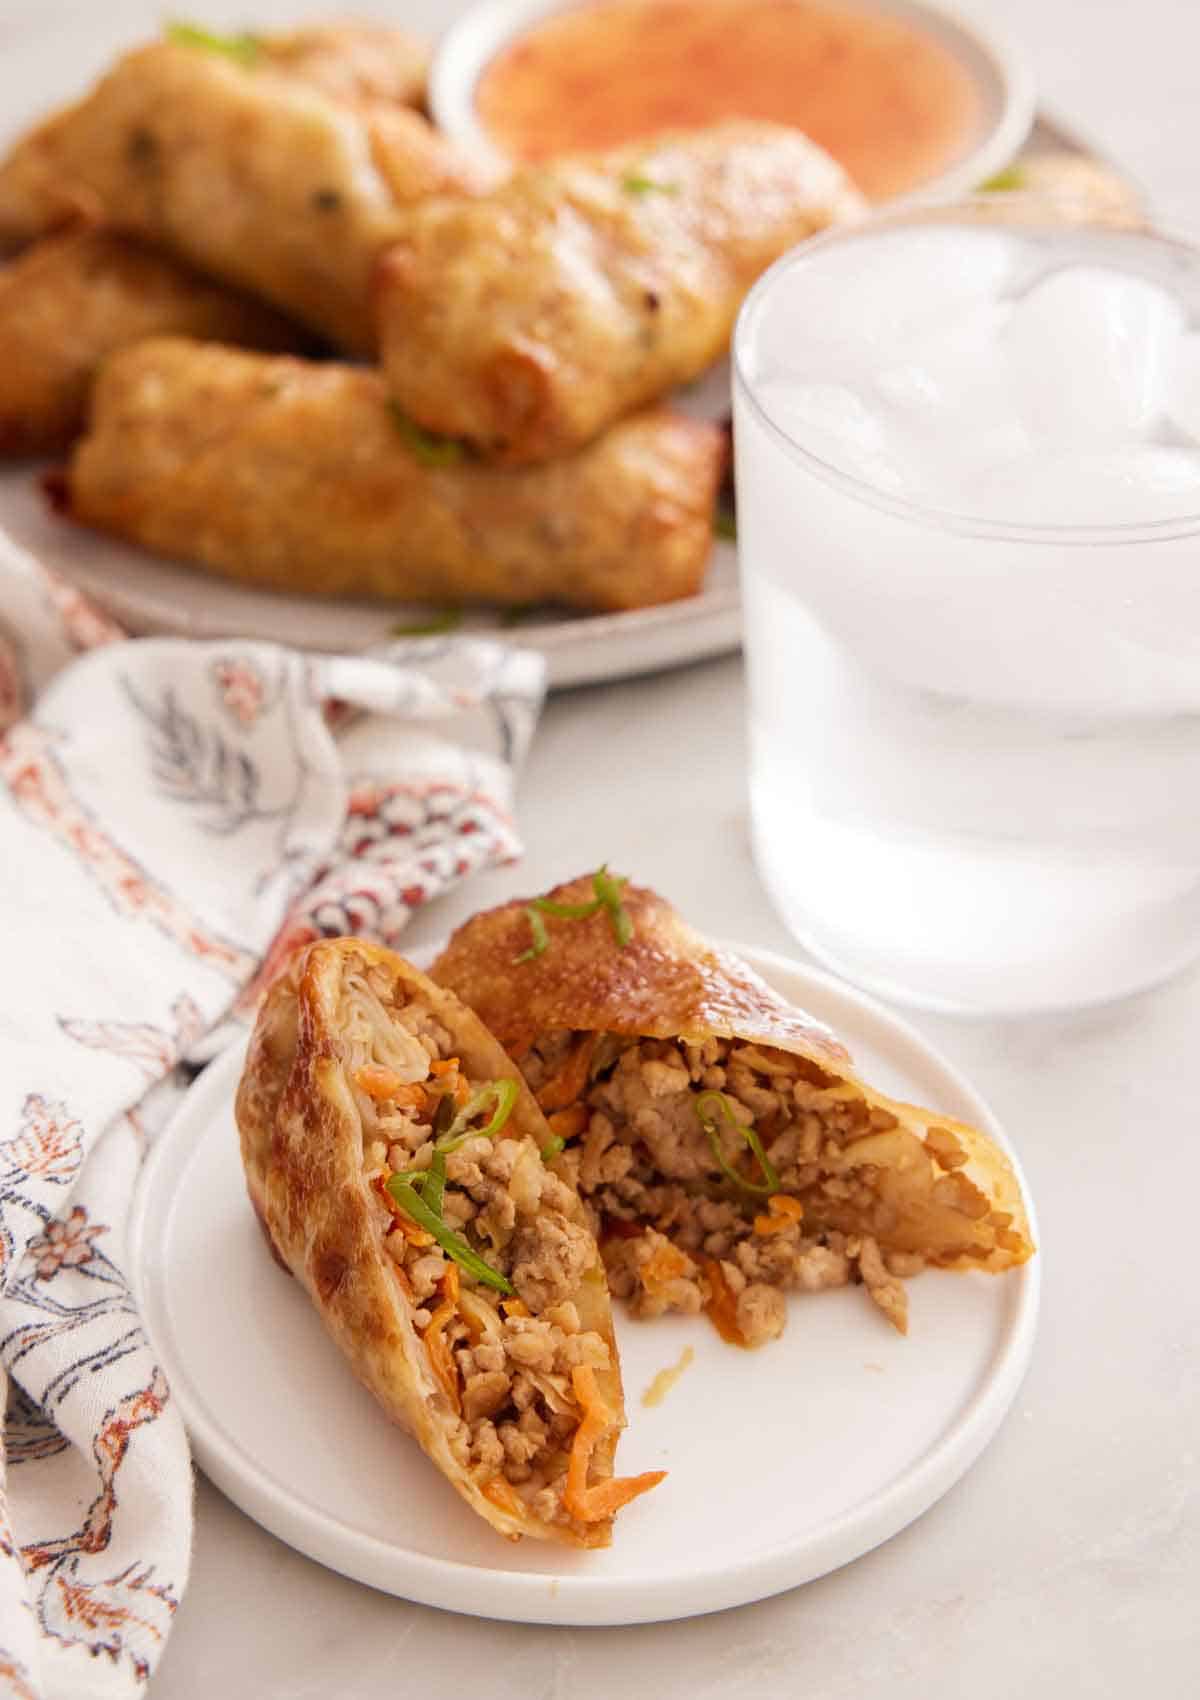 A plate with an air fryer egg roll cut in half. A glass of ice water and platter of more air fryer egg rolls in the background.